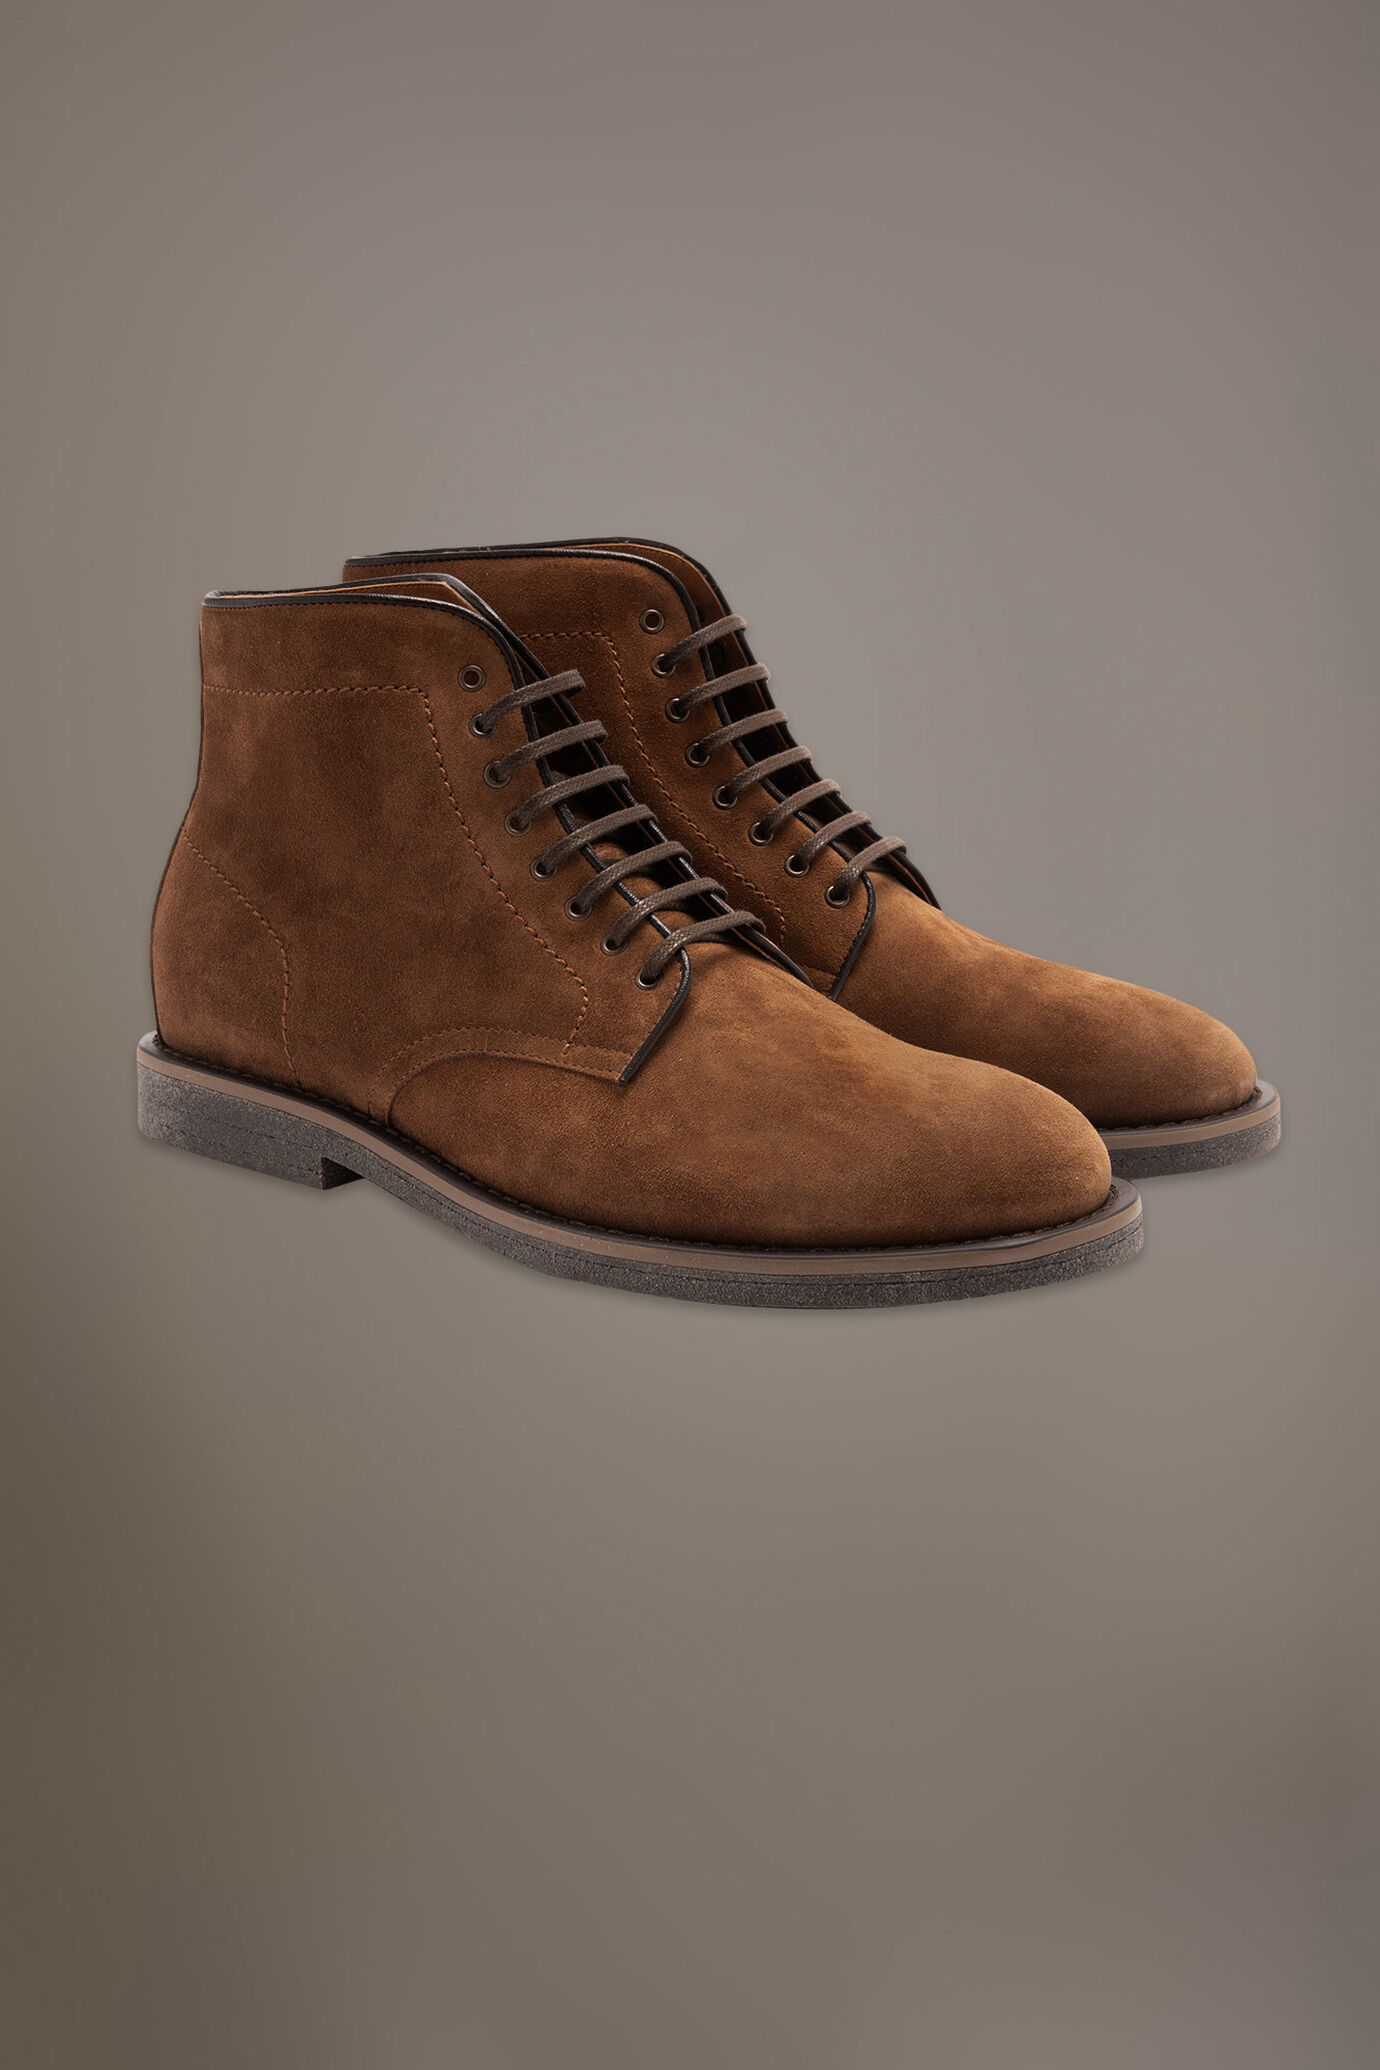 Suede boots - 100% leather